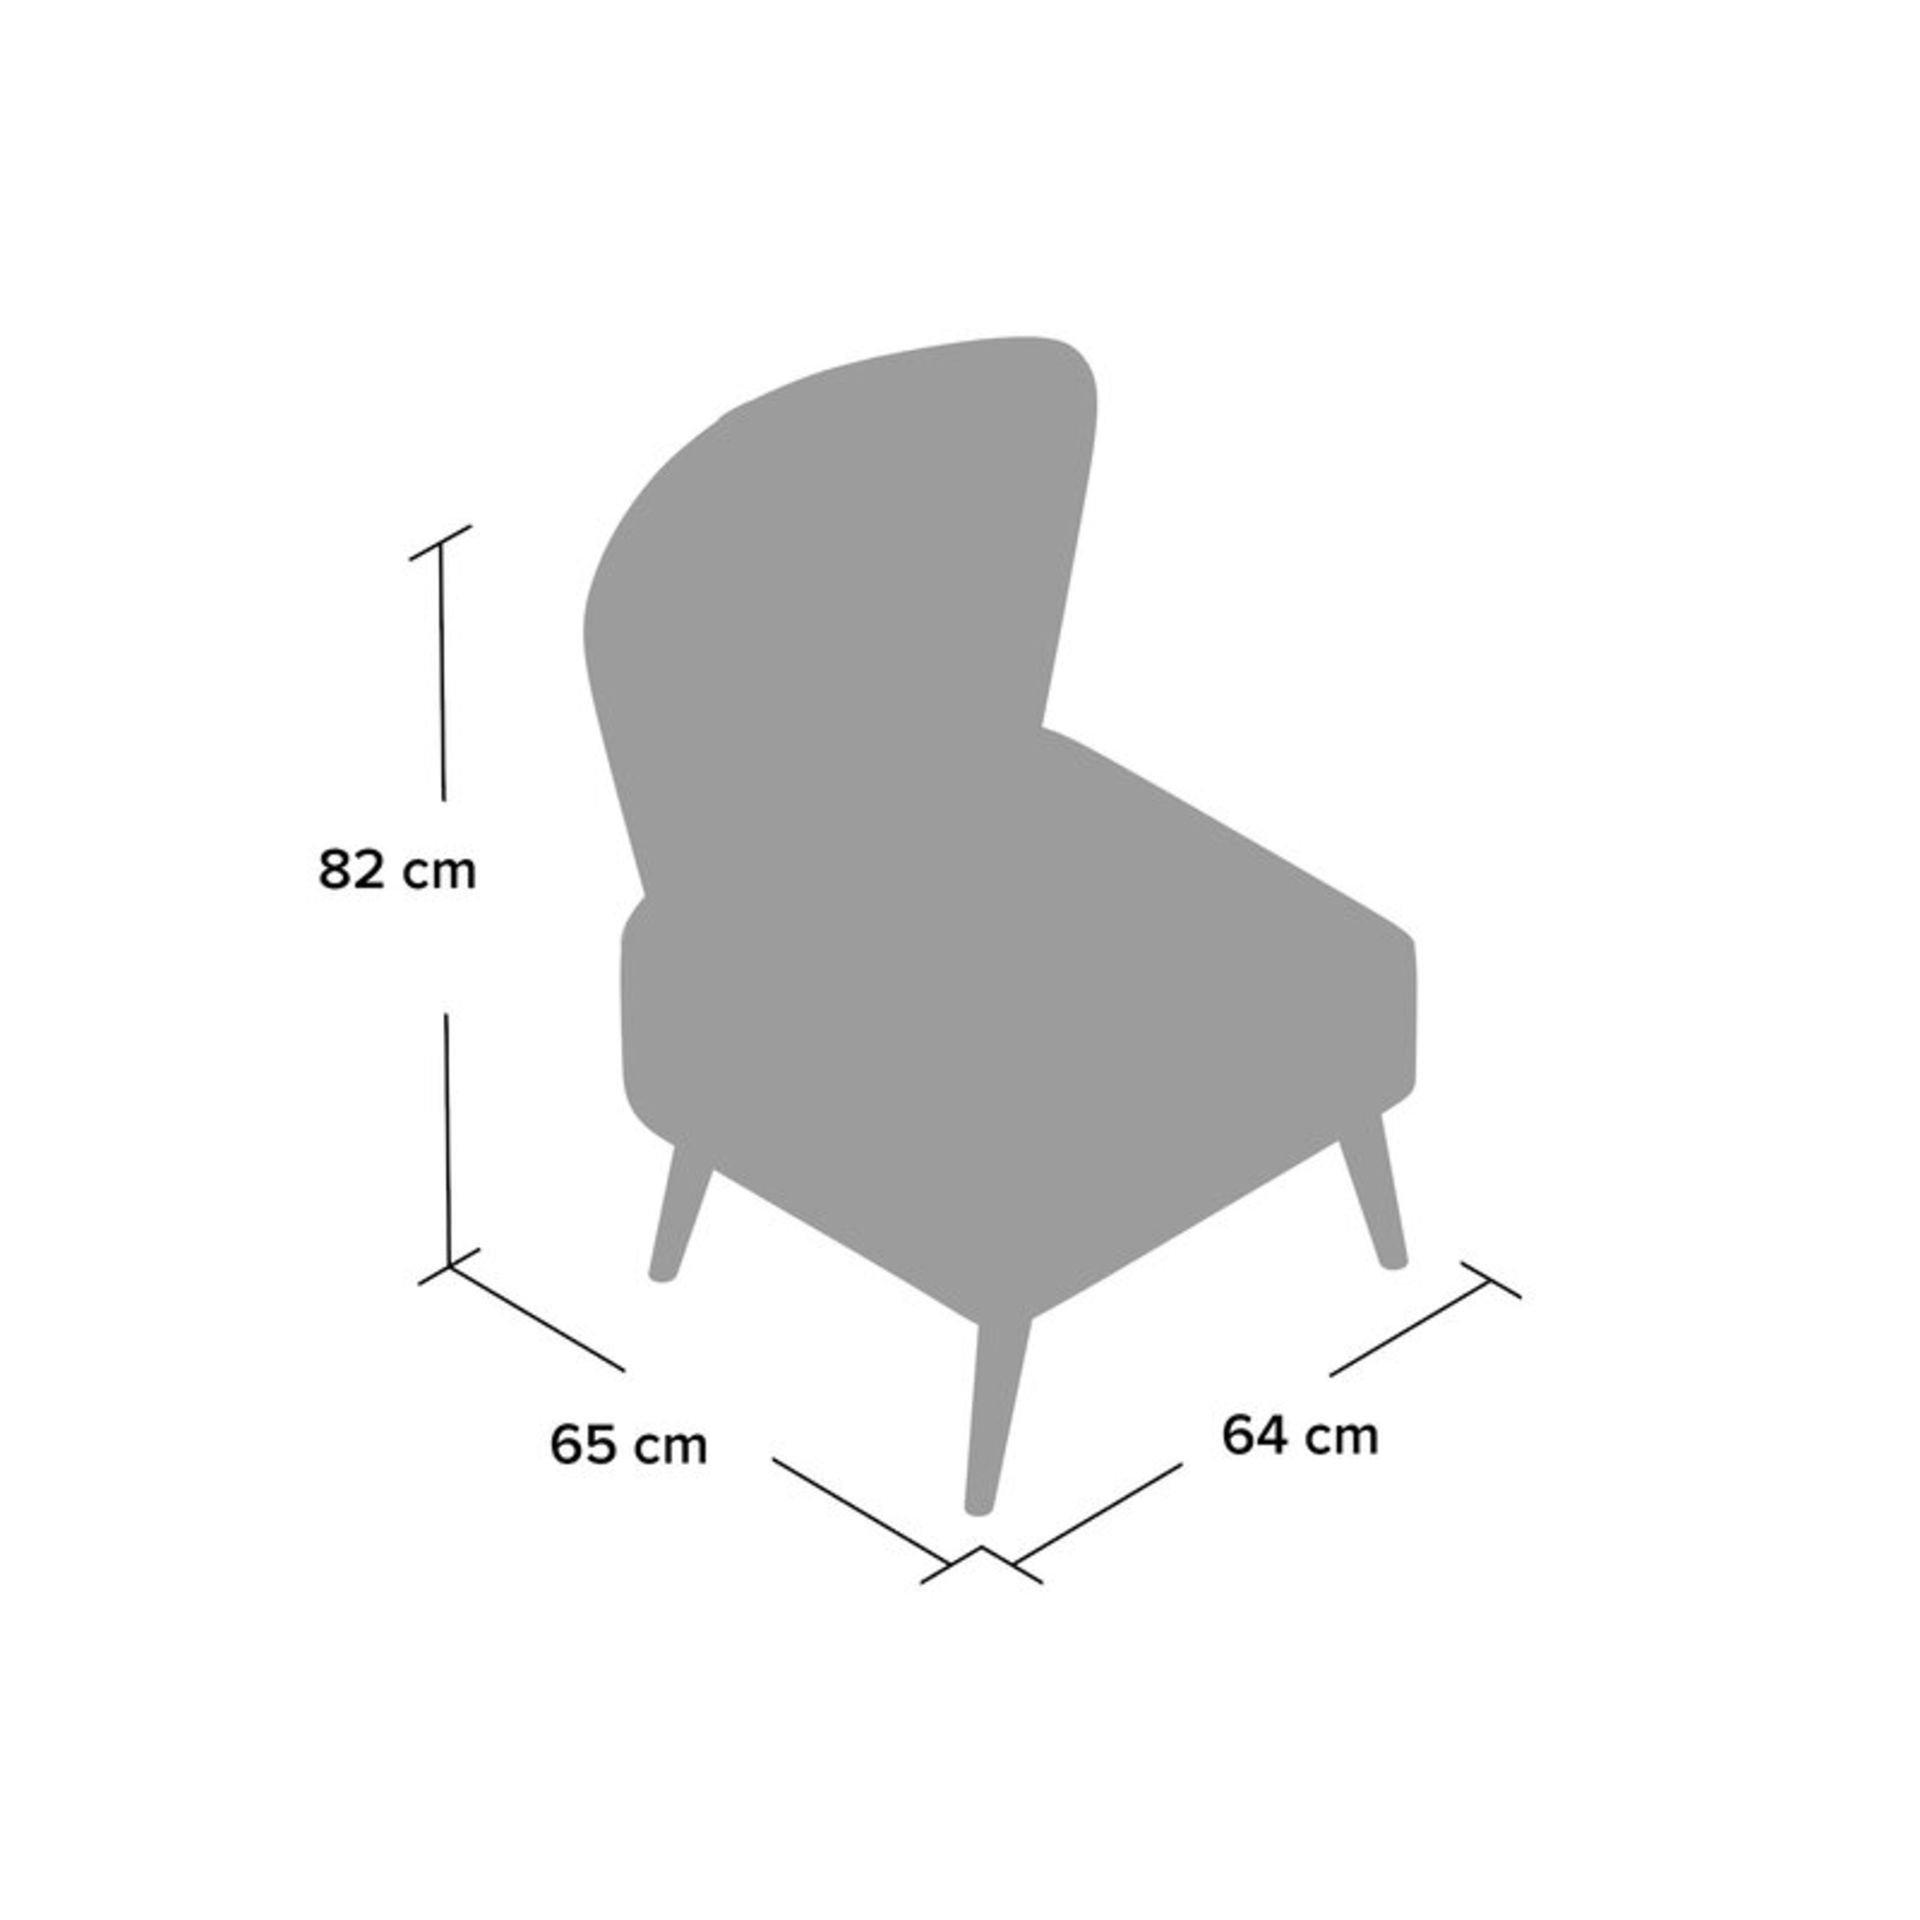 Wight Cocktail Chair Black - RRP £207.99 - Image 3 of 3